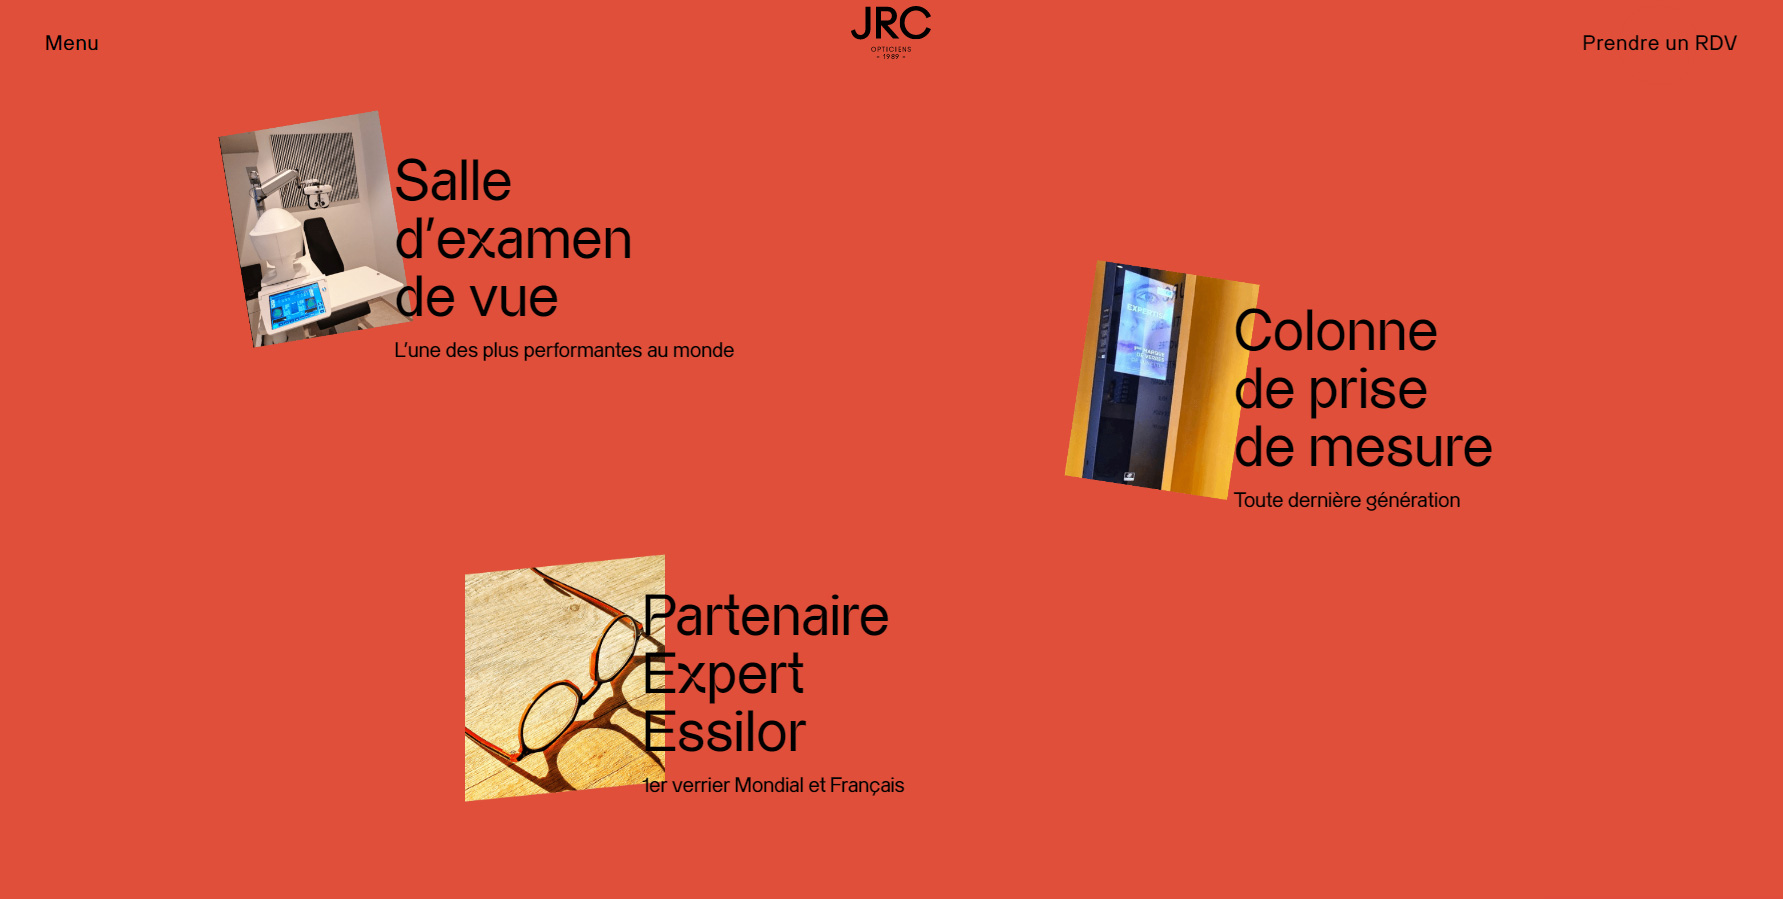 JRC Opticiens - Website of the Day